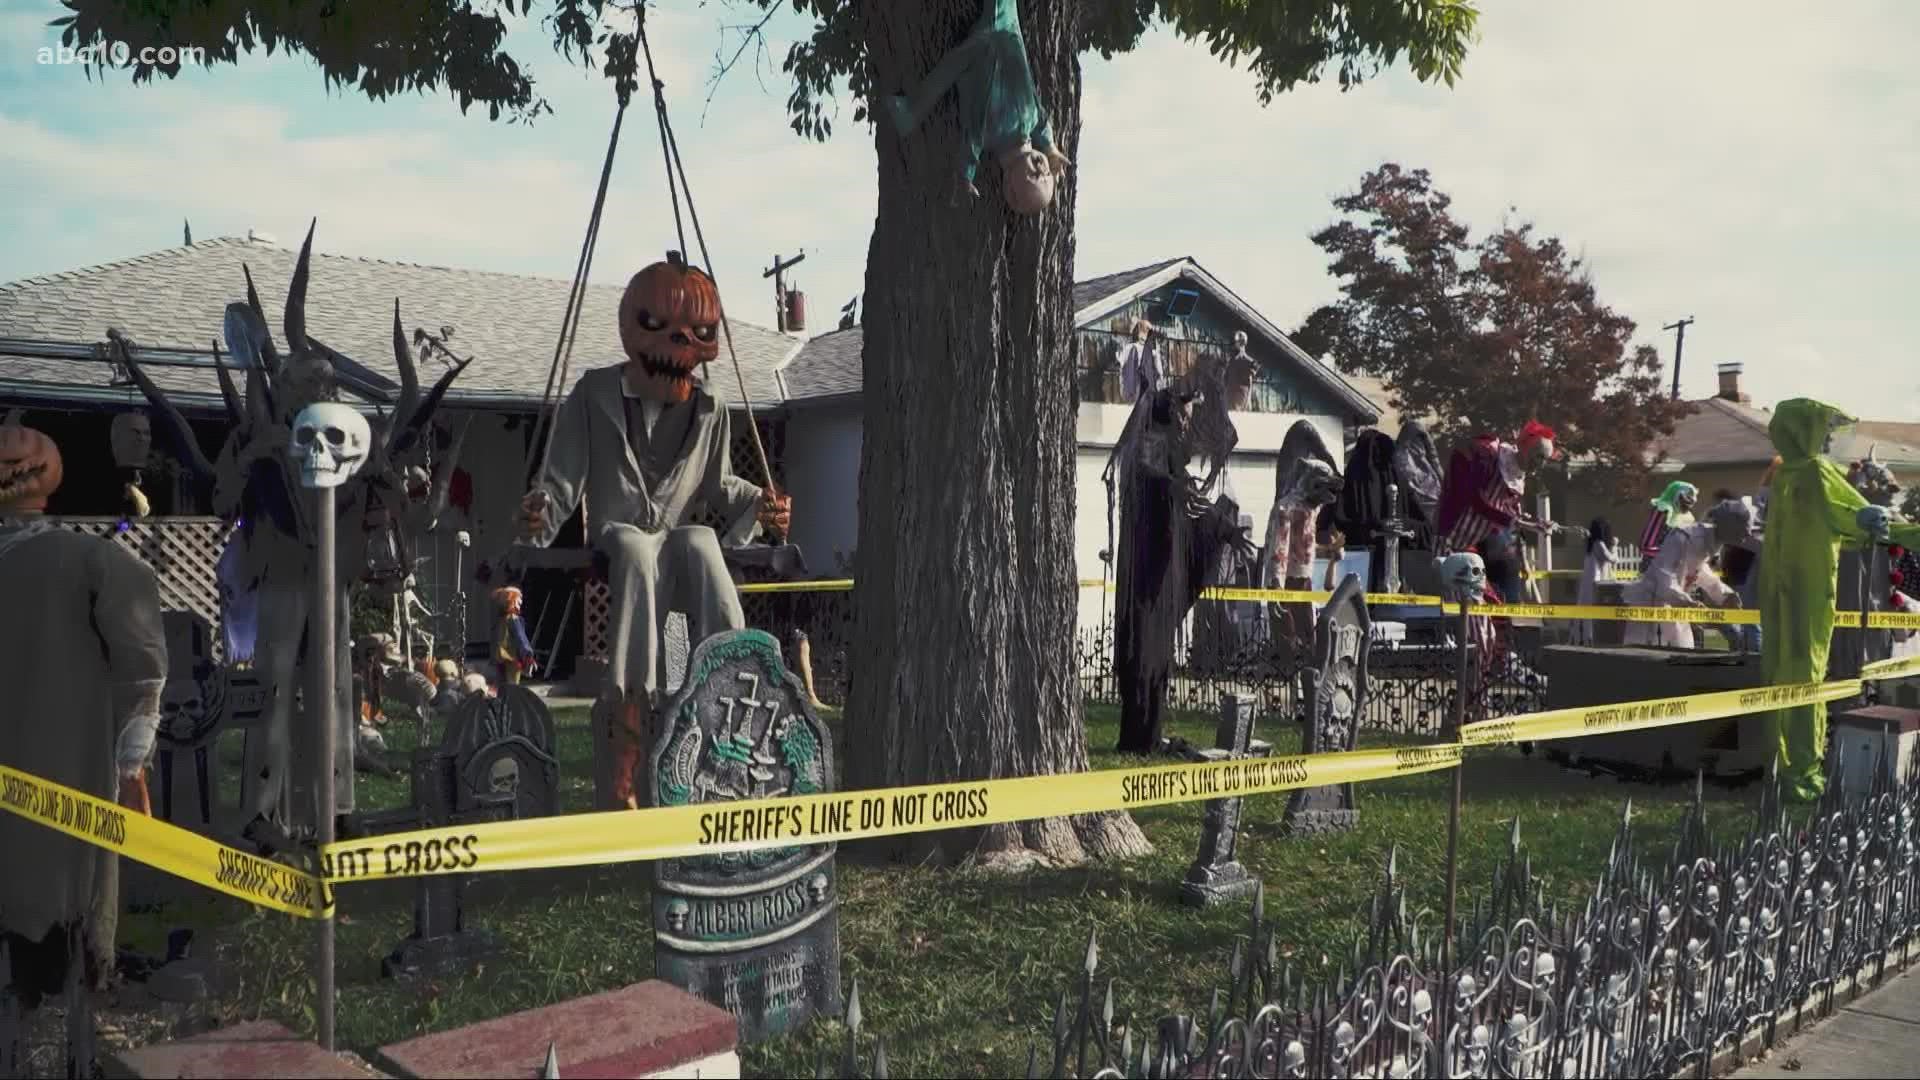 Joseph Amey is the mastermind behind an elaborate Halloween display including animatronics, props and even live actors.